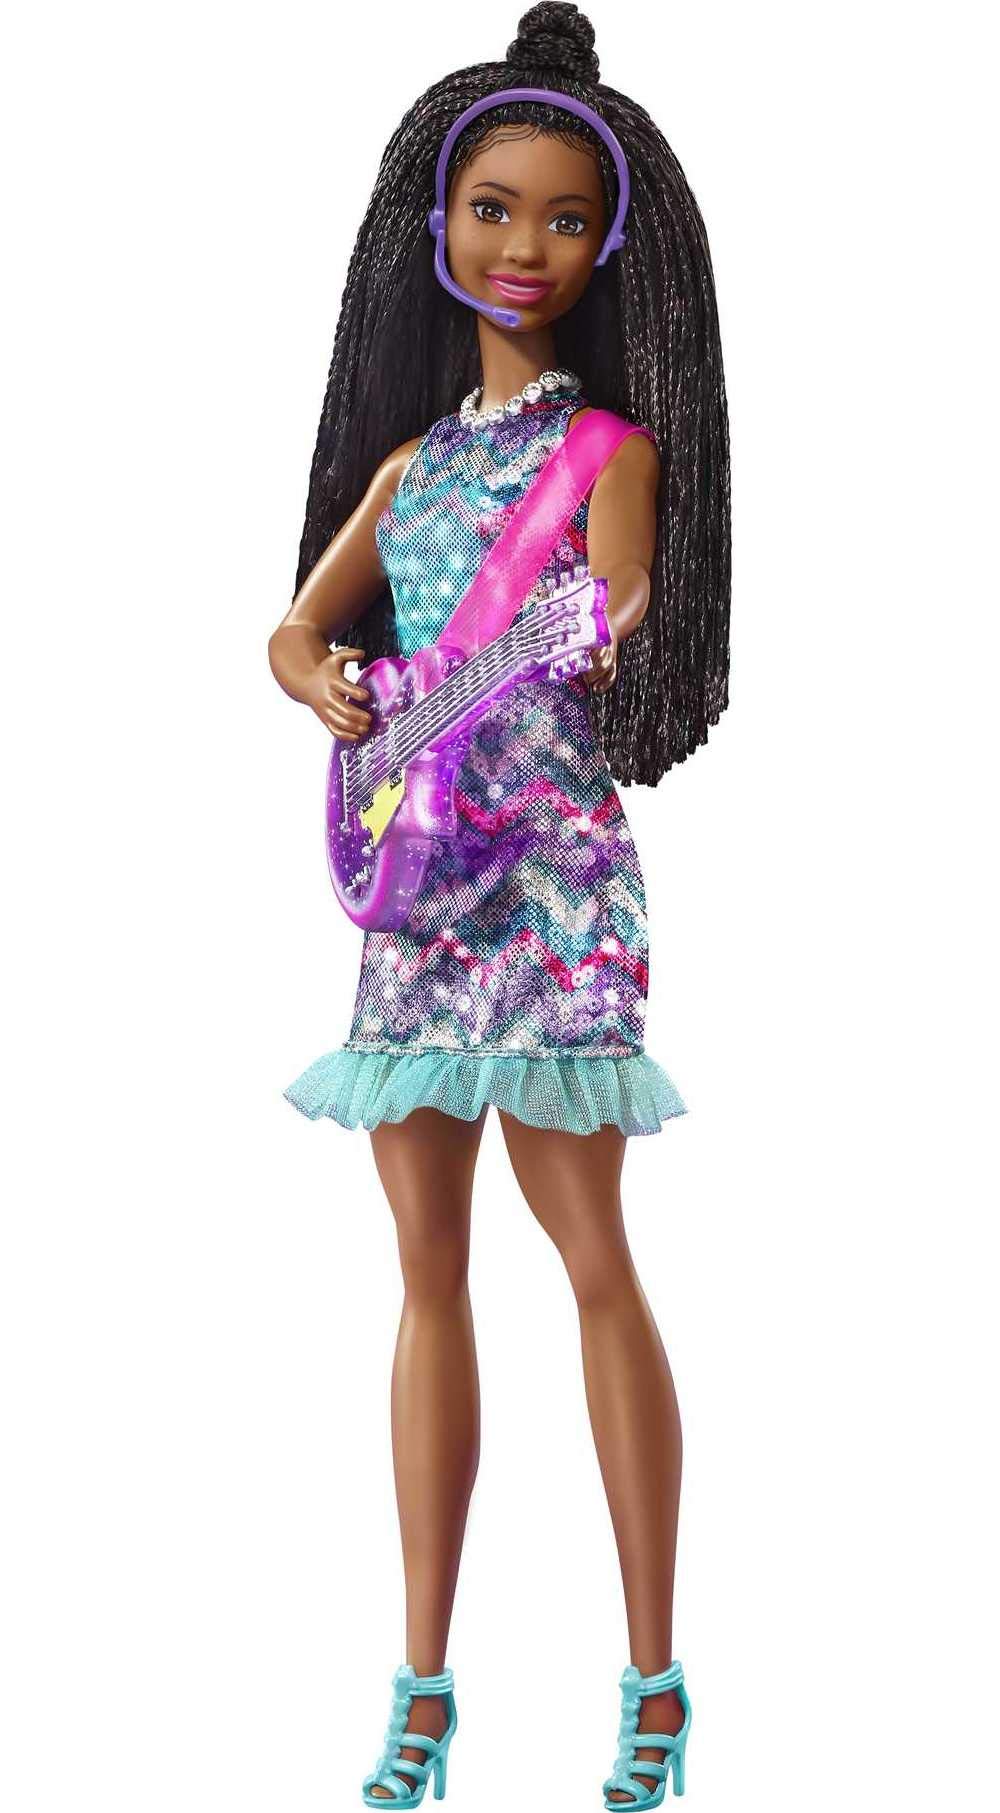 Barbie: Big City, Big Dreams Singing Brooklyn” Roberts Doll (11.5-in Brunette with Braids) with Music, Light-Up Feature, Microphone & Accessories, Gift for 3 to 7 Year Olds